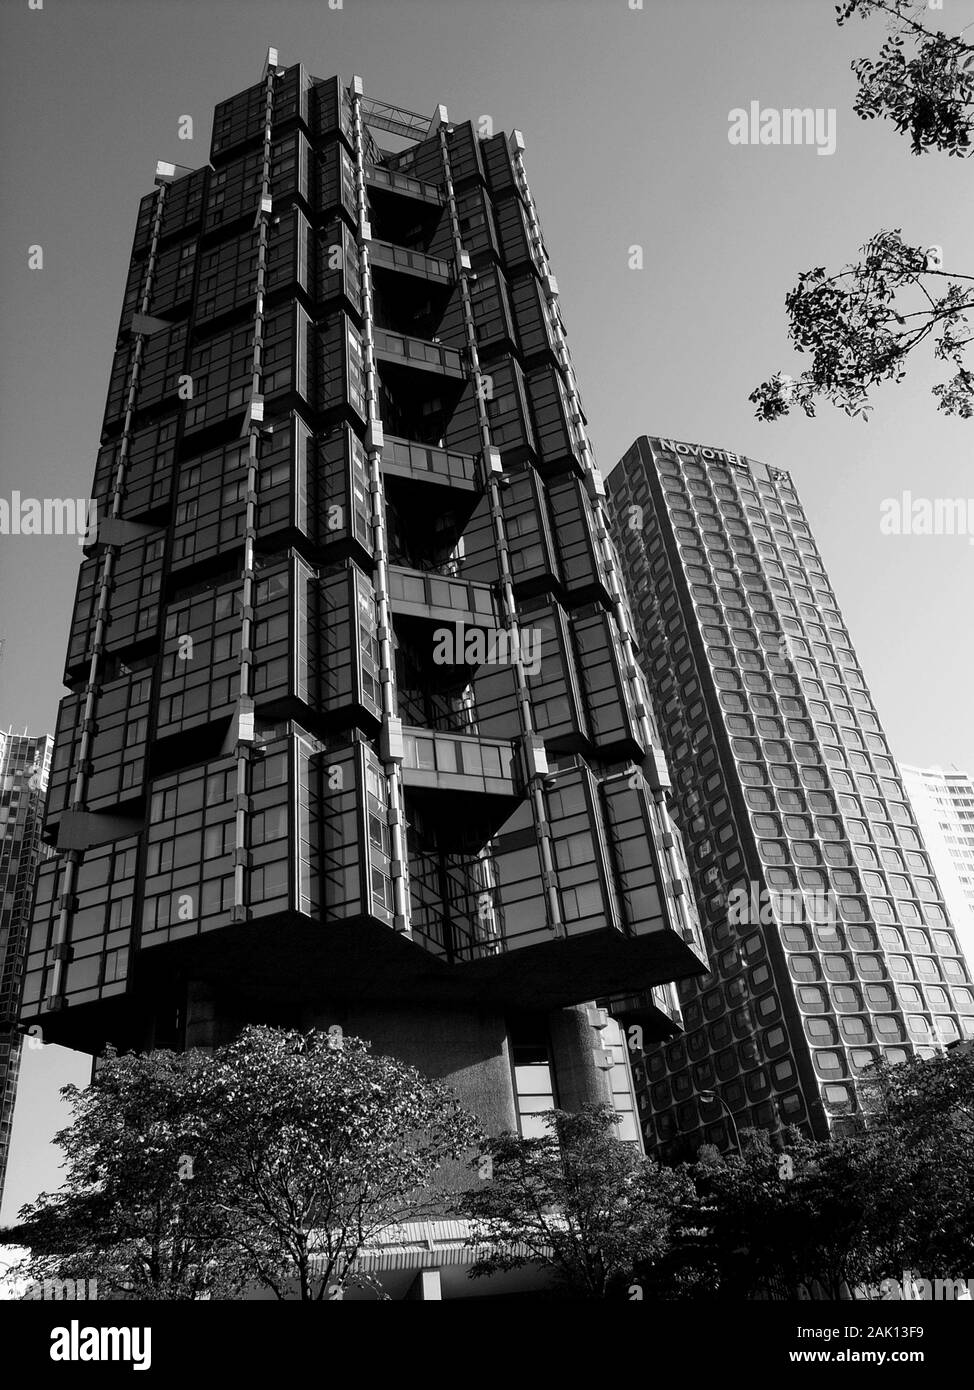 THE 100 METERS HIGH TOTEM TOWER IN BEAUGRENELLE SEINE RIVER PARIS FRANCE - ANDRAULT AND PARAT ARCHITECTS - 1970's ARCHITECTURE - CONTEMPORARY ARCHITECTURE © Frédéric BEAUMONT Stock Photo